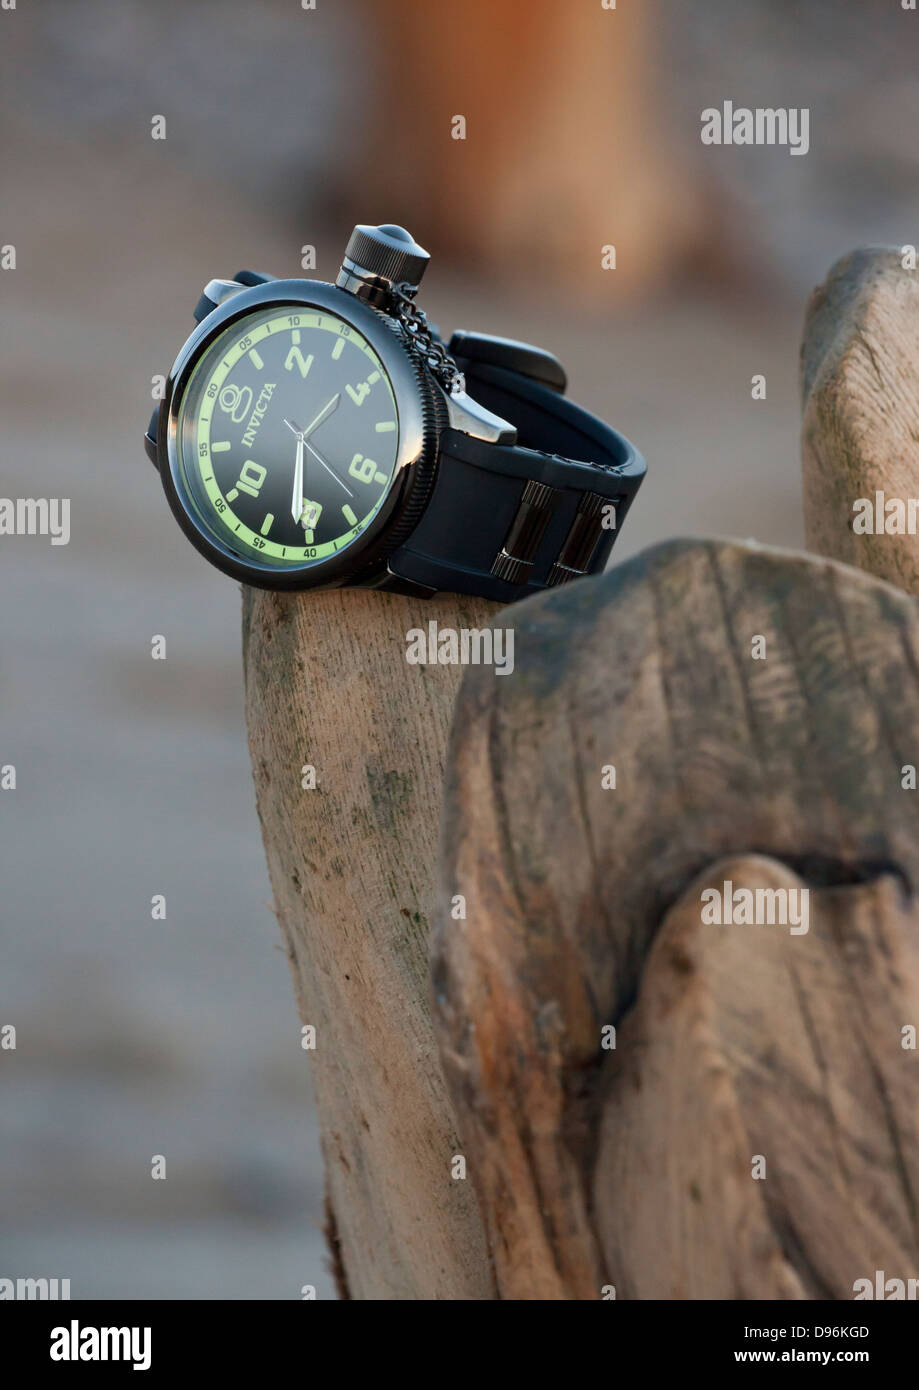 Contemporary Russian military deep sea Divers watch photographed on beach  location Stock Photo - Alamy